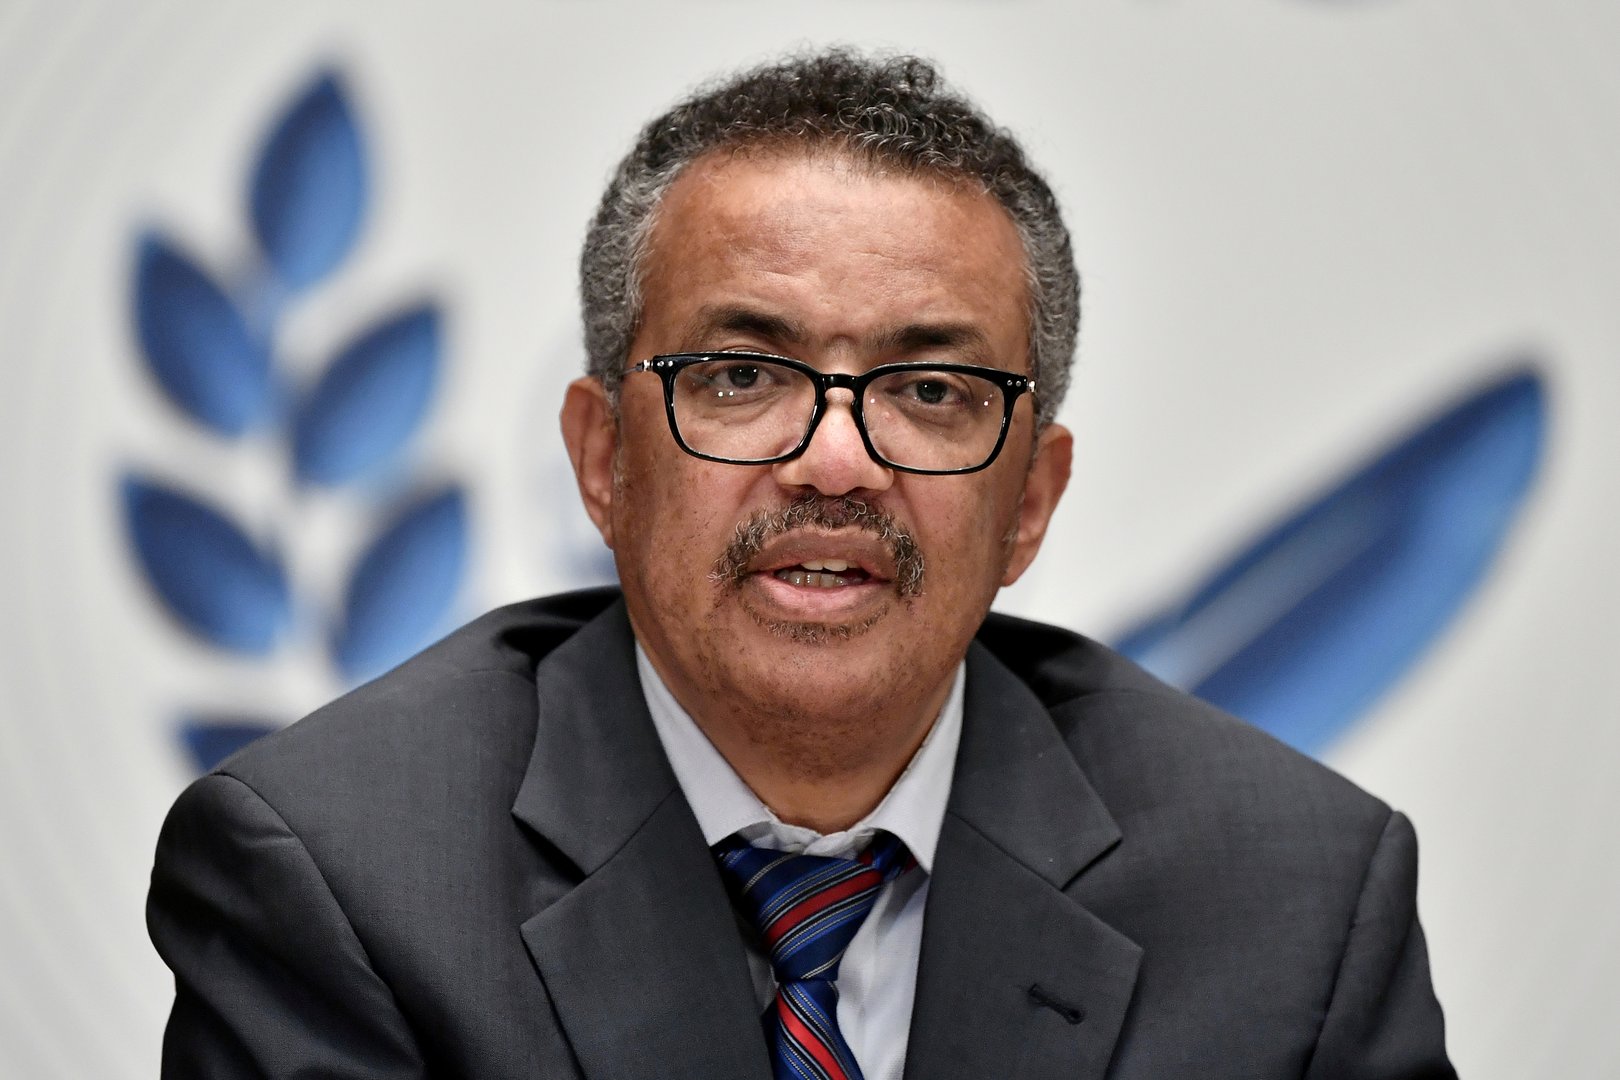 image WHO chief Tedros selects new leadership team, document shows